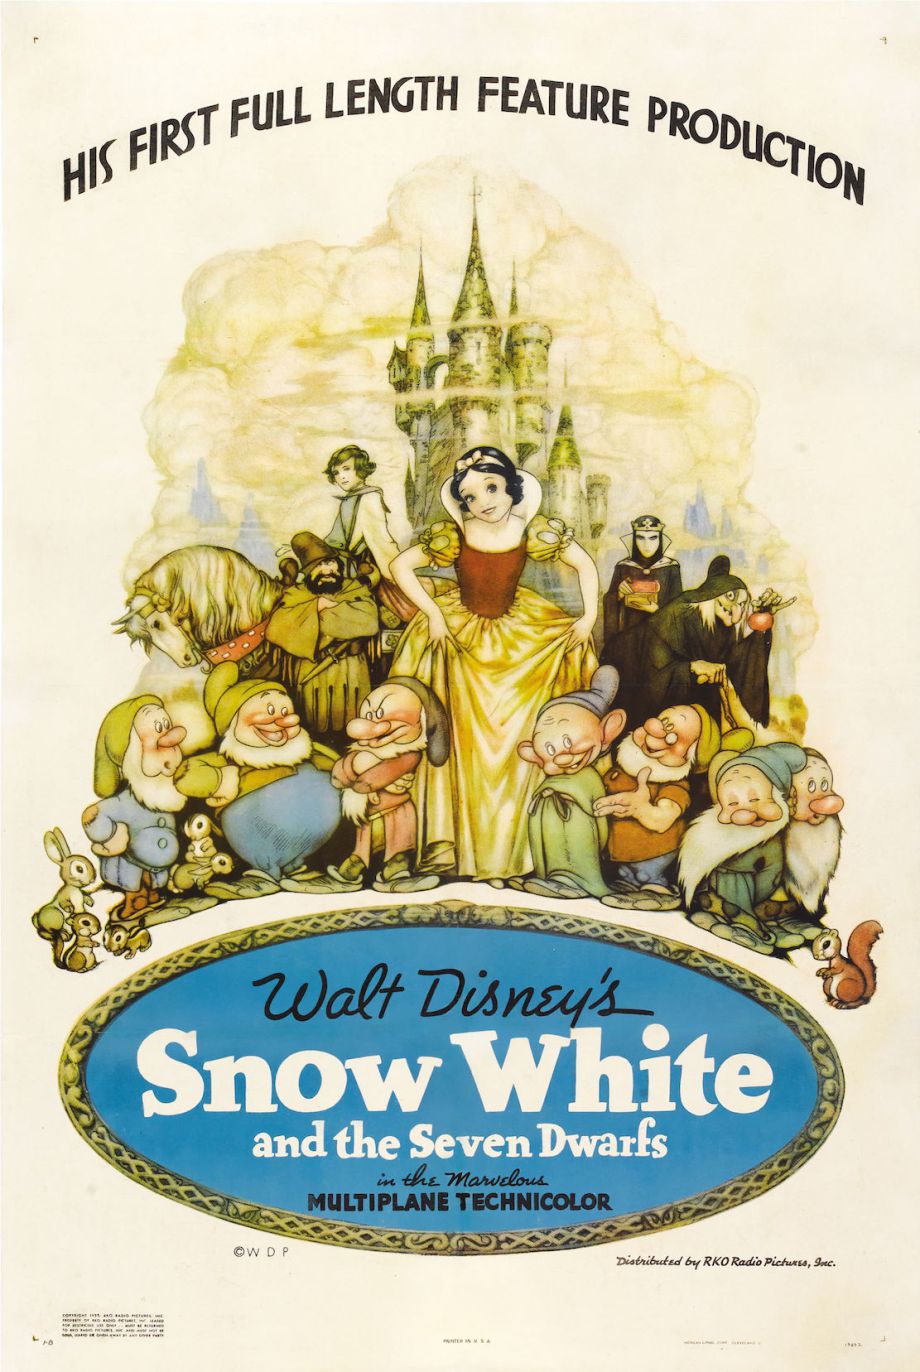 #10 Snow White and the Seven Dwarfs (1937), Original Gross: $184,925,486,Gross Adjusted for 2017: $966 Million.